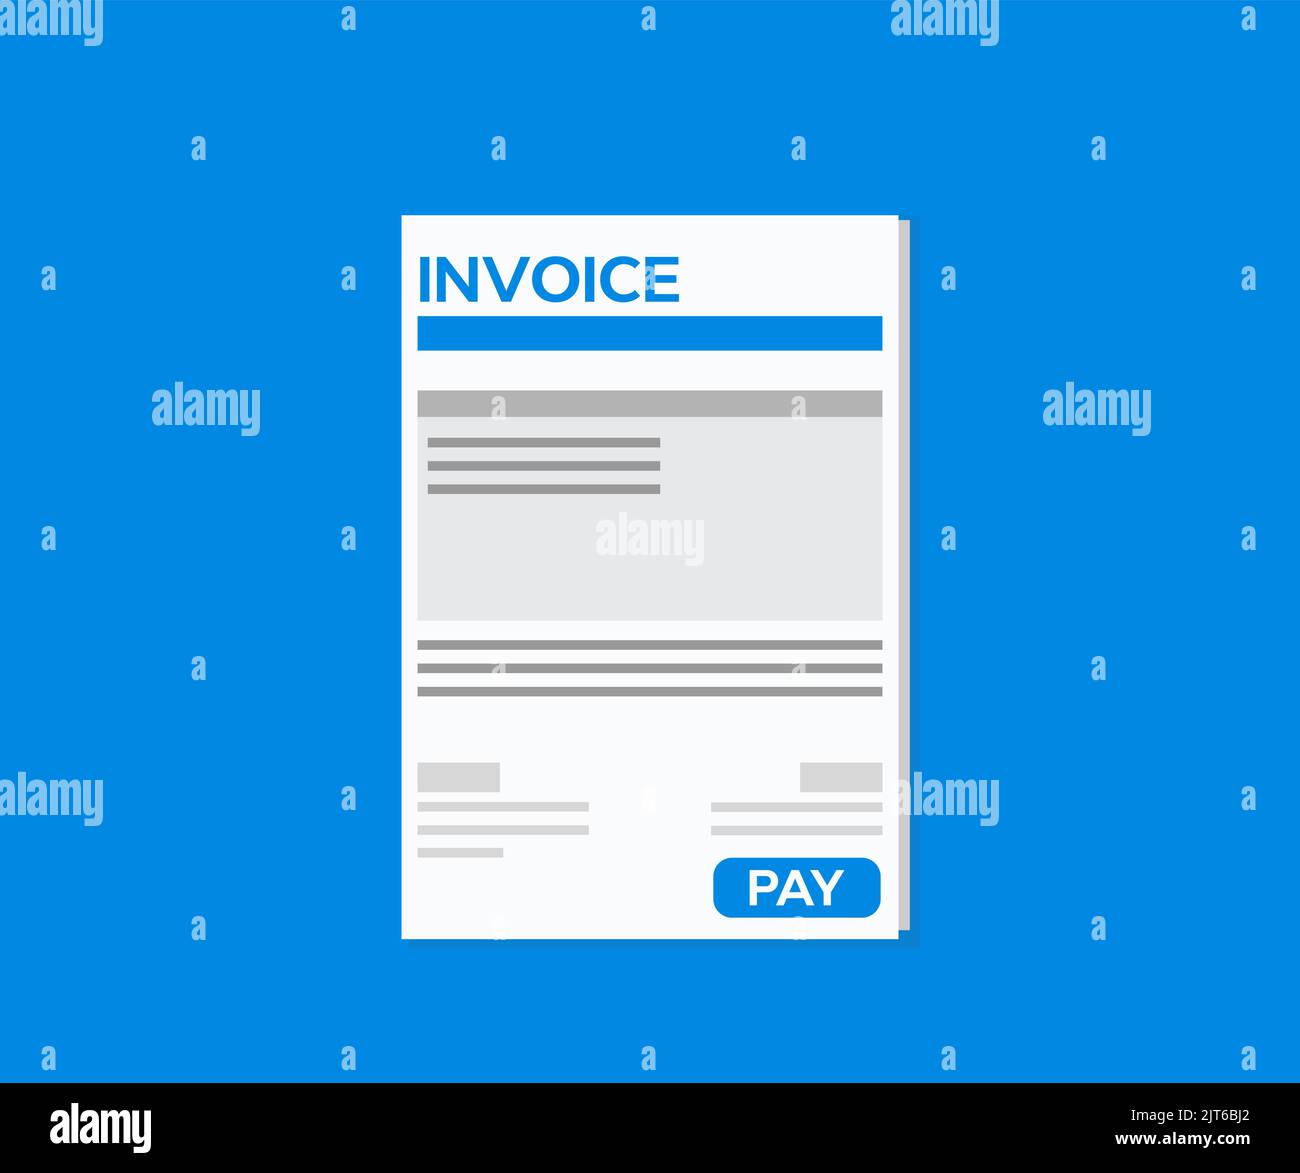 Business invoice form,  Invoicing quotes, money bills or price invoices logo design. Payment agreement, Tax form, bill graphic or payment receipt. Stock Vector